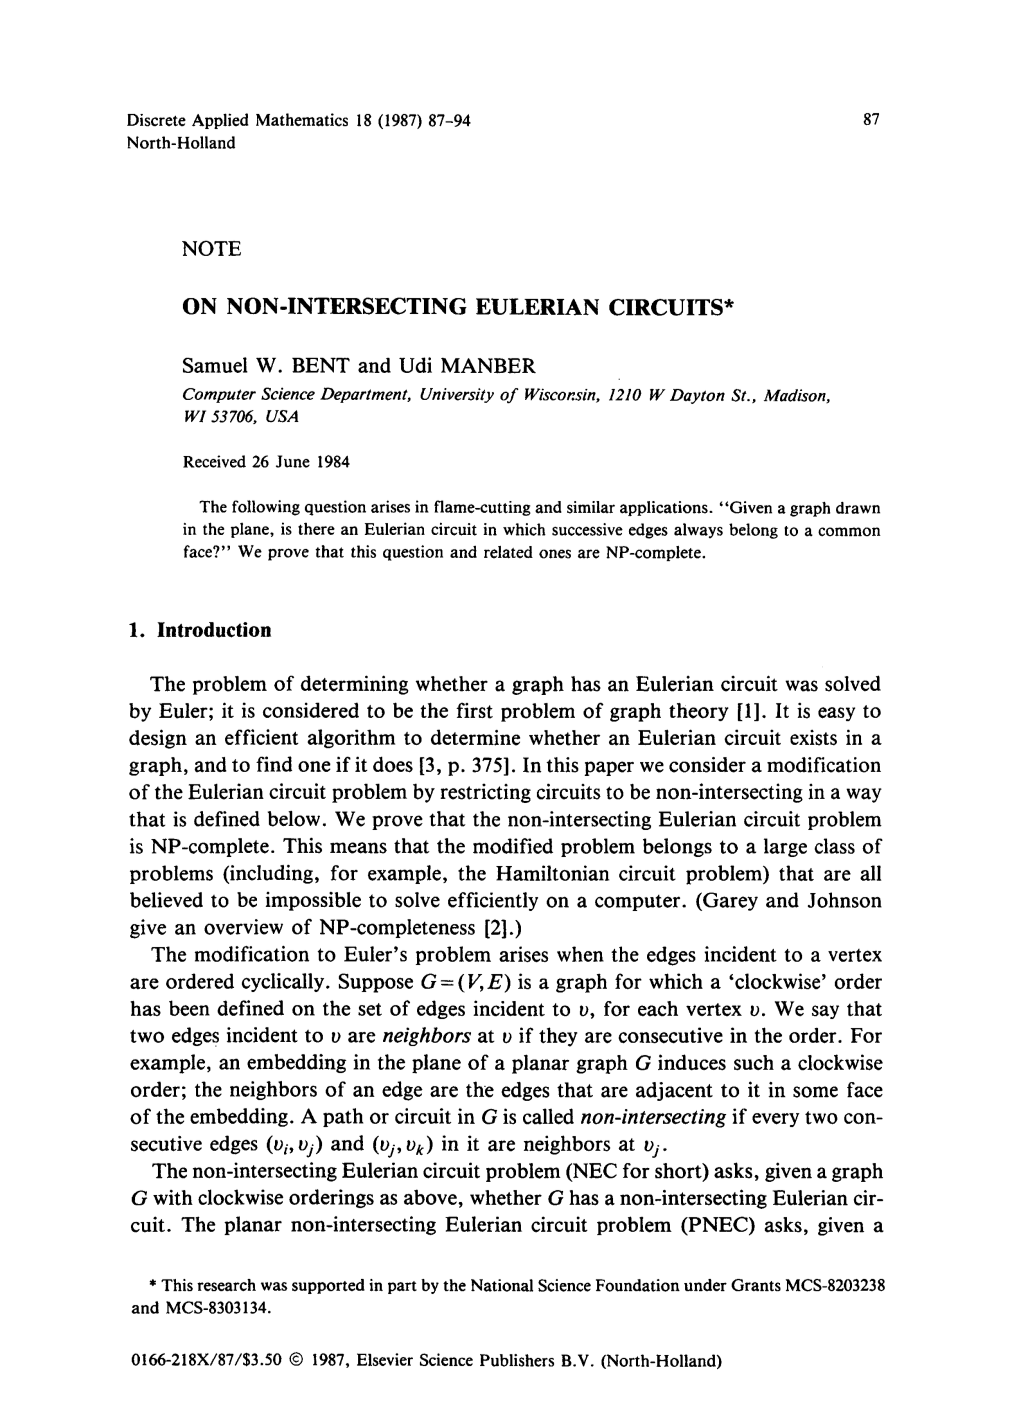 NOTE on NON-INTERSECTING EULERIAN CIRCUITS* Samuel W